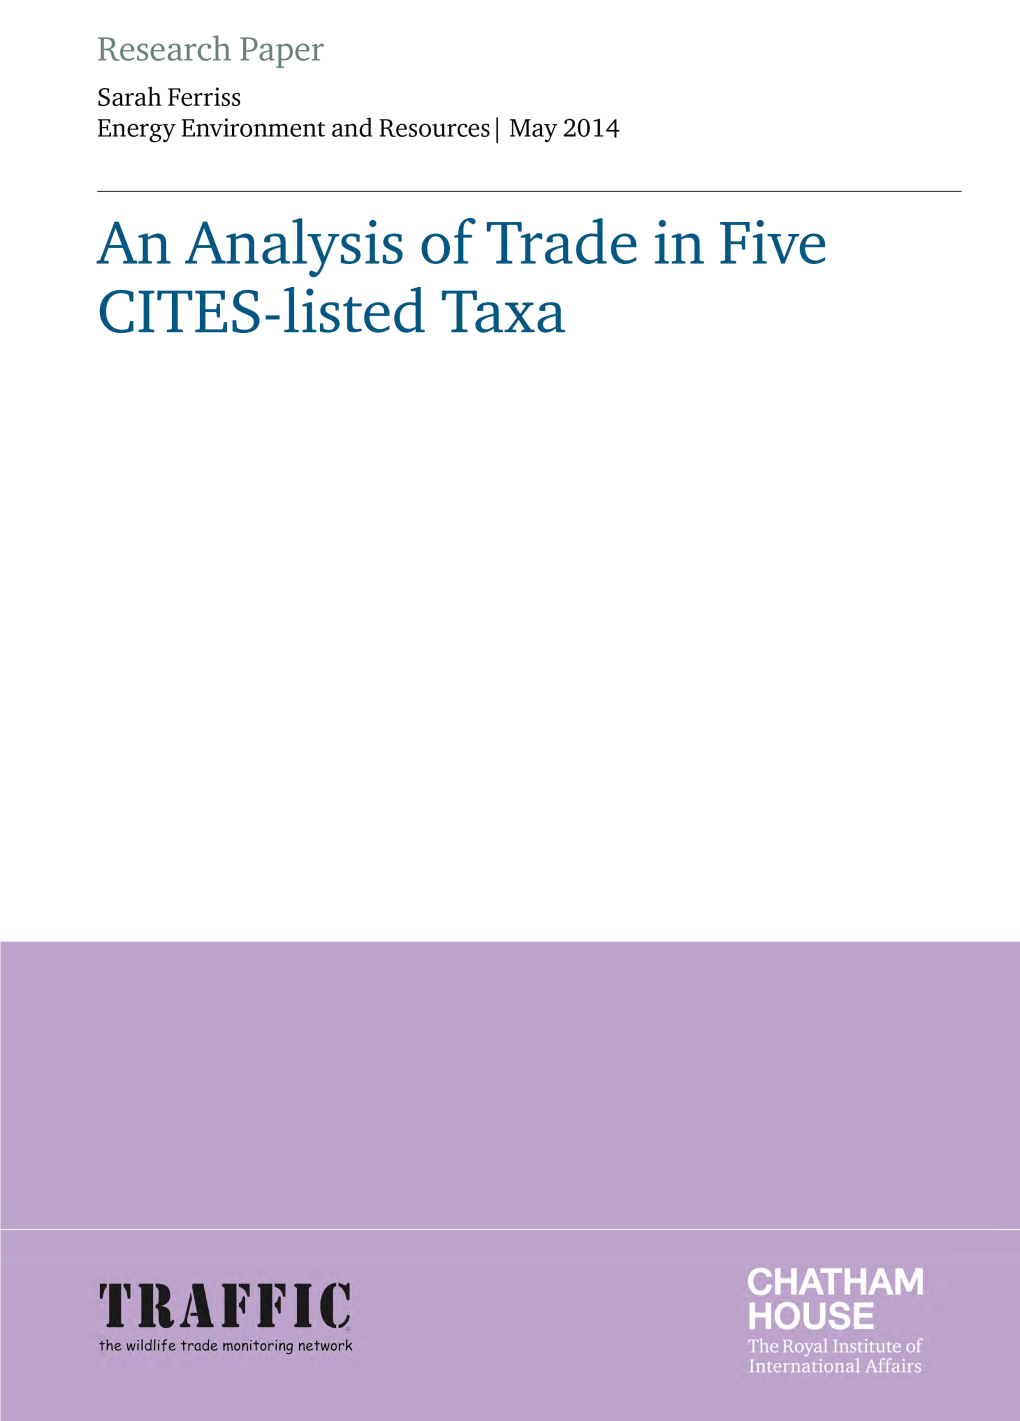 An Analysis of Trade in Five CITES-Listed Taxa. Chatham House and TRAFFIC. (PDF, 2